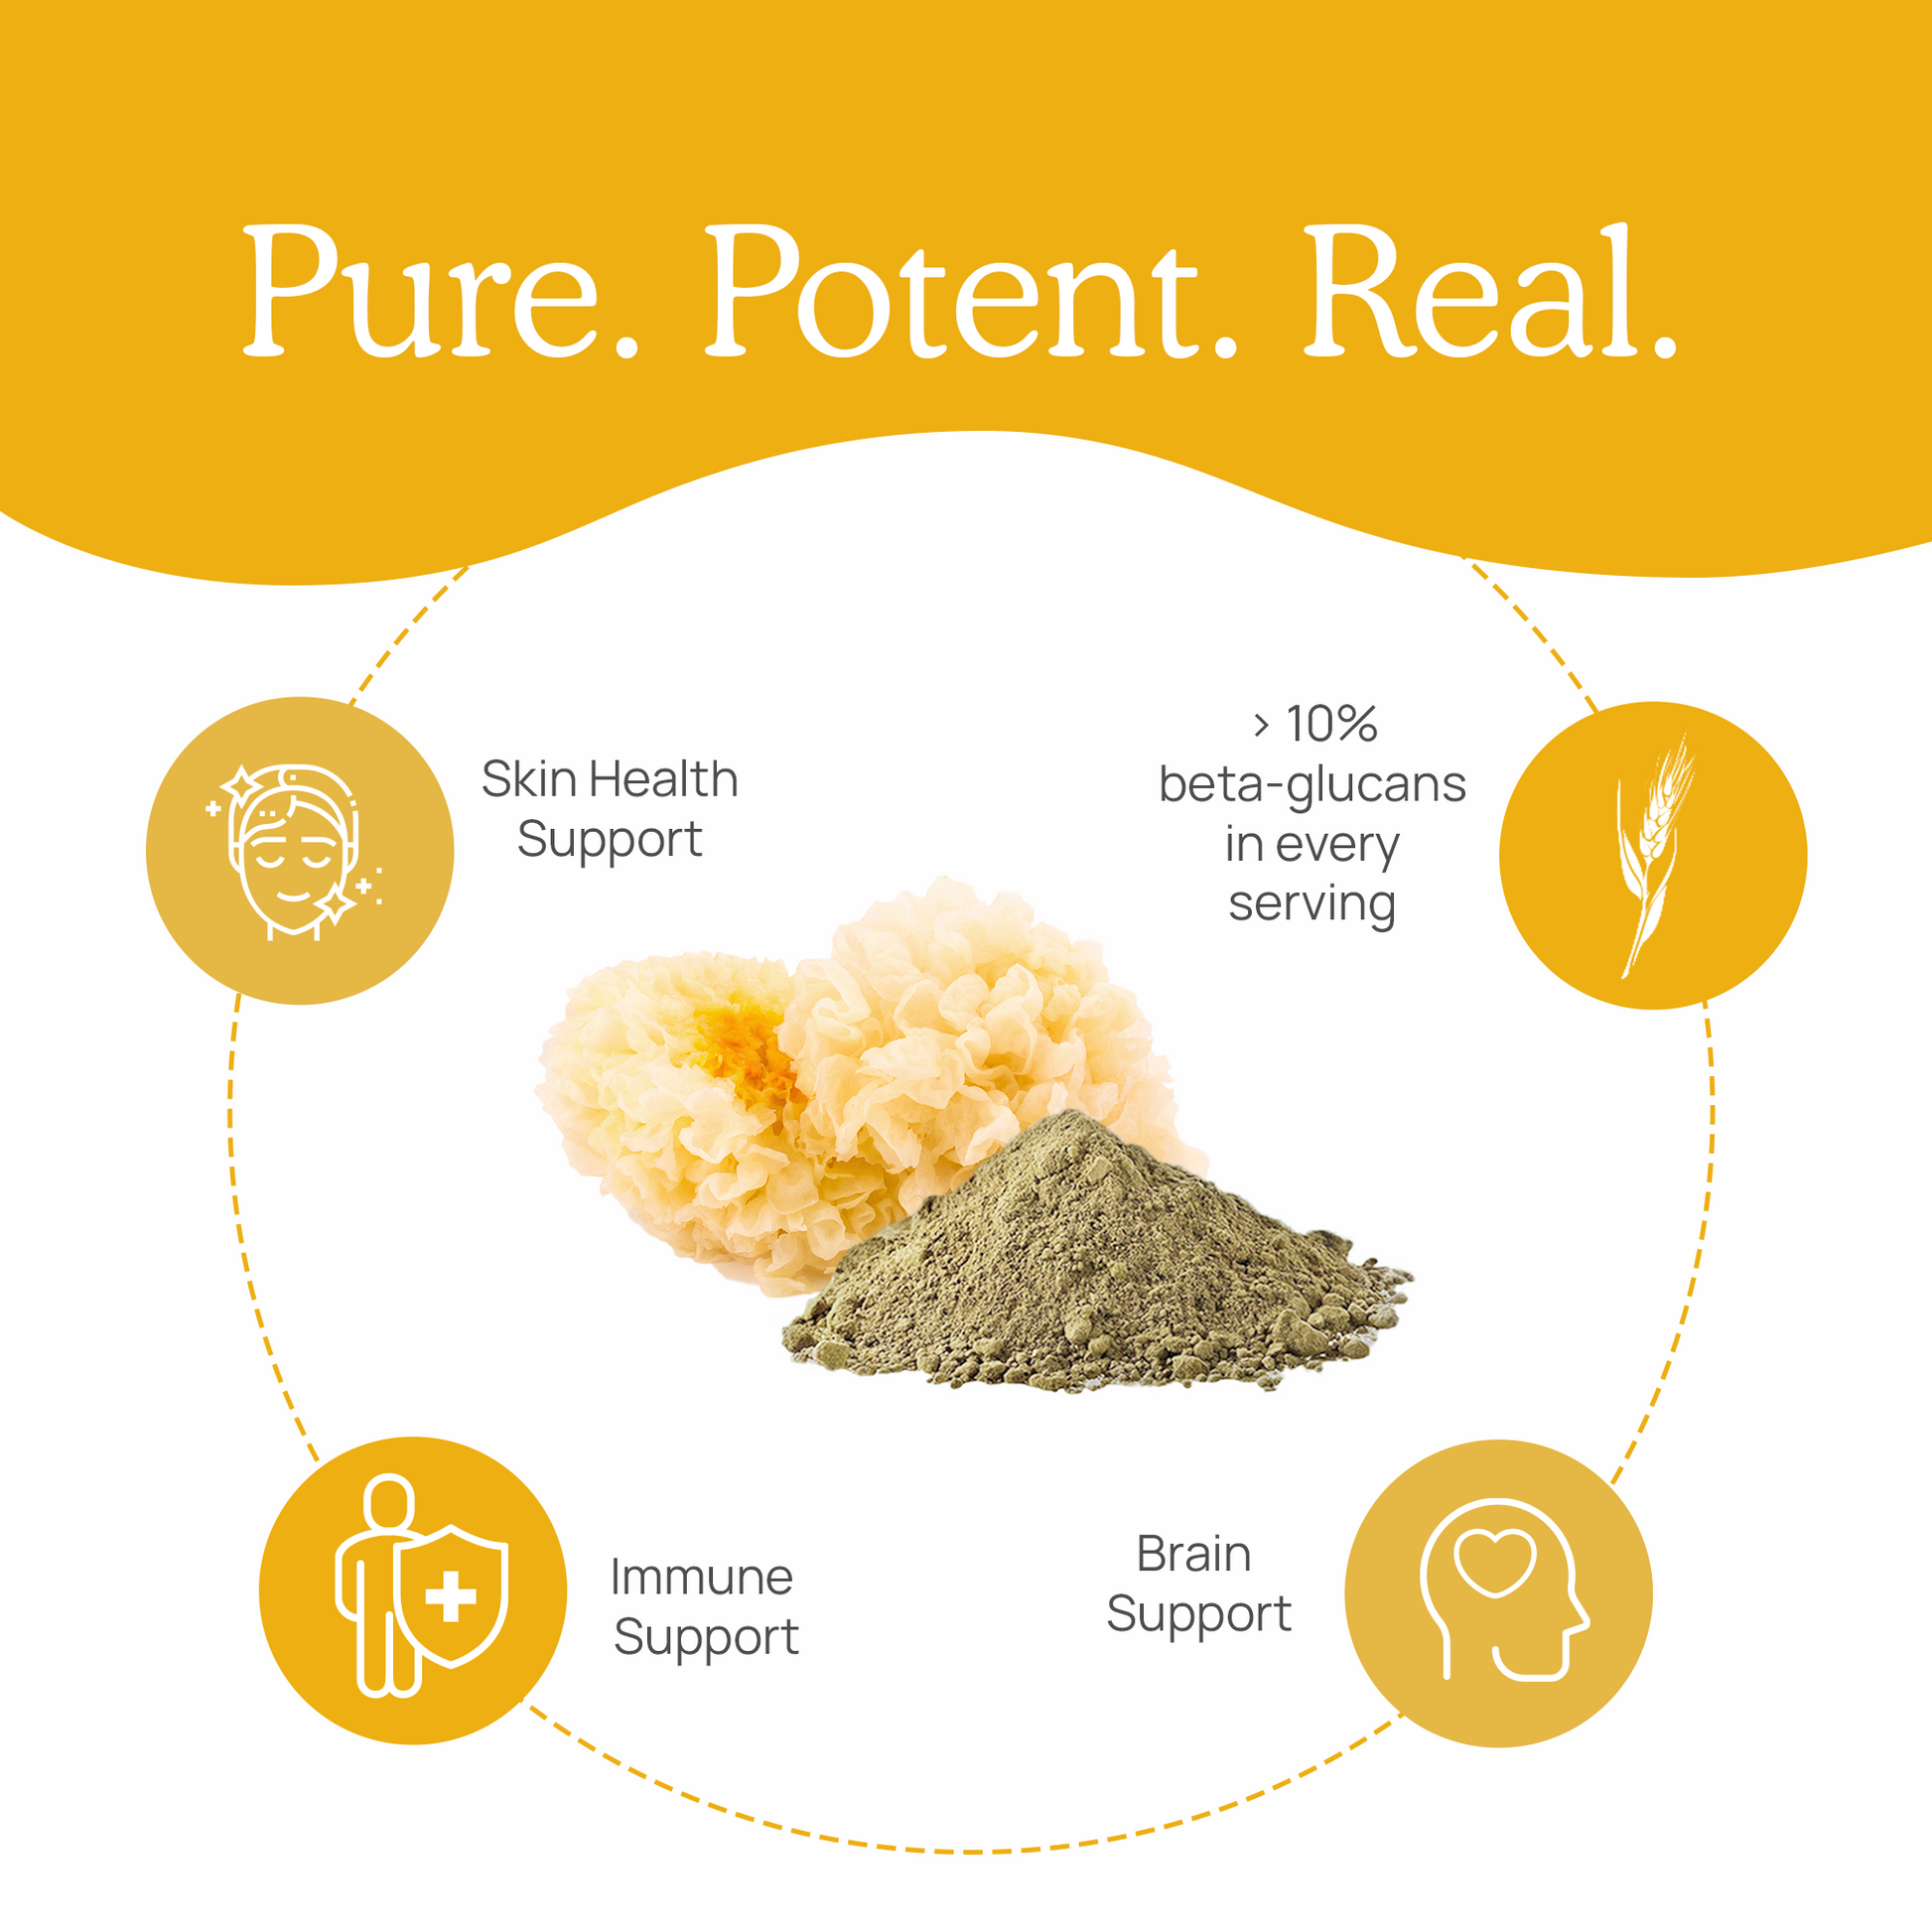 Real Mushrooms' Organic Tremella Mushroom Extract Powder for Pets is pure, potent, and real.